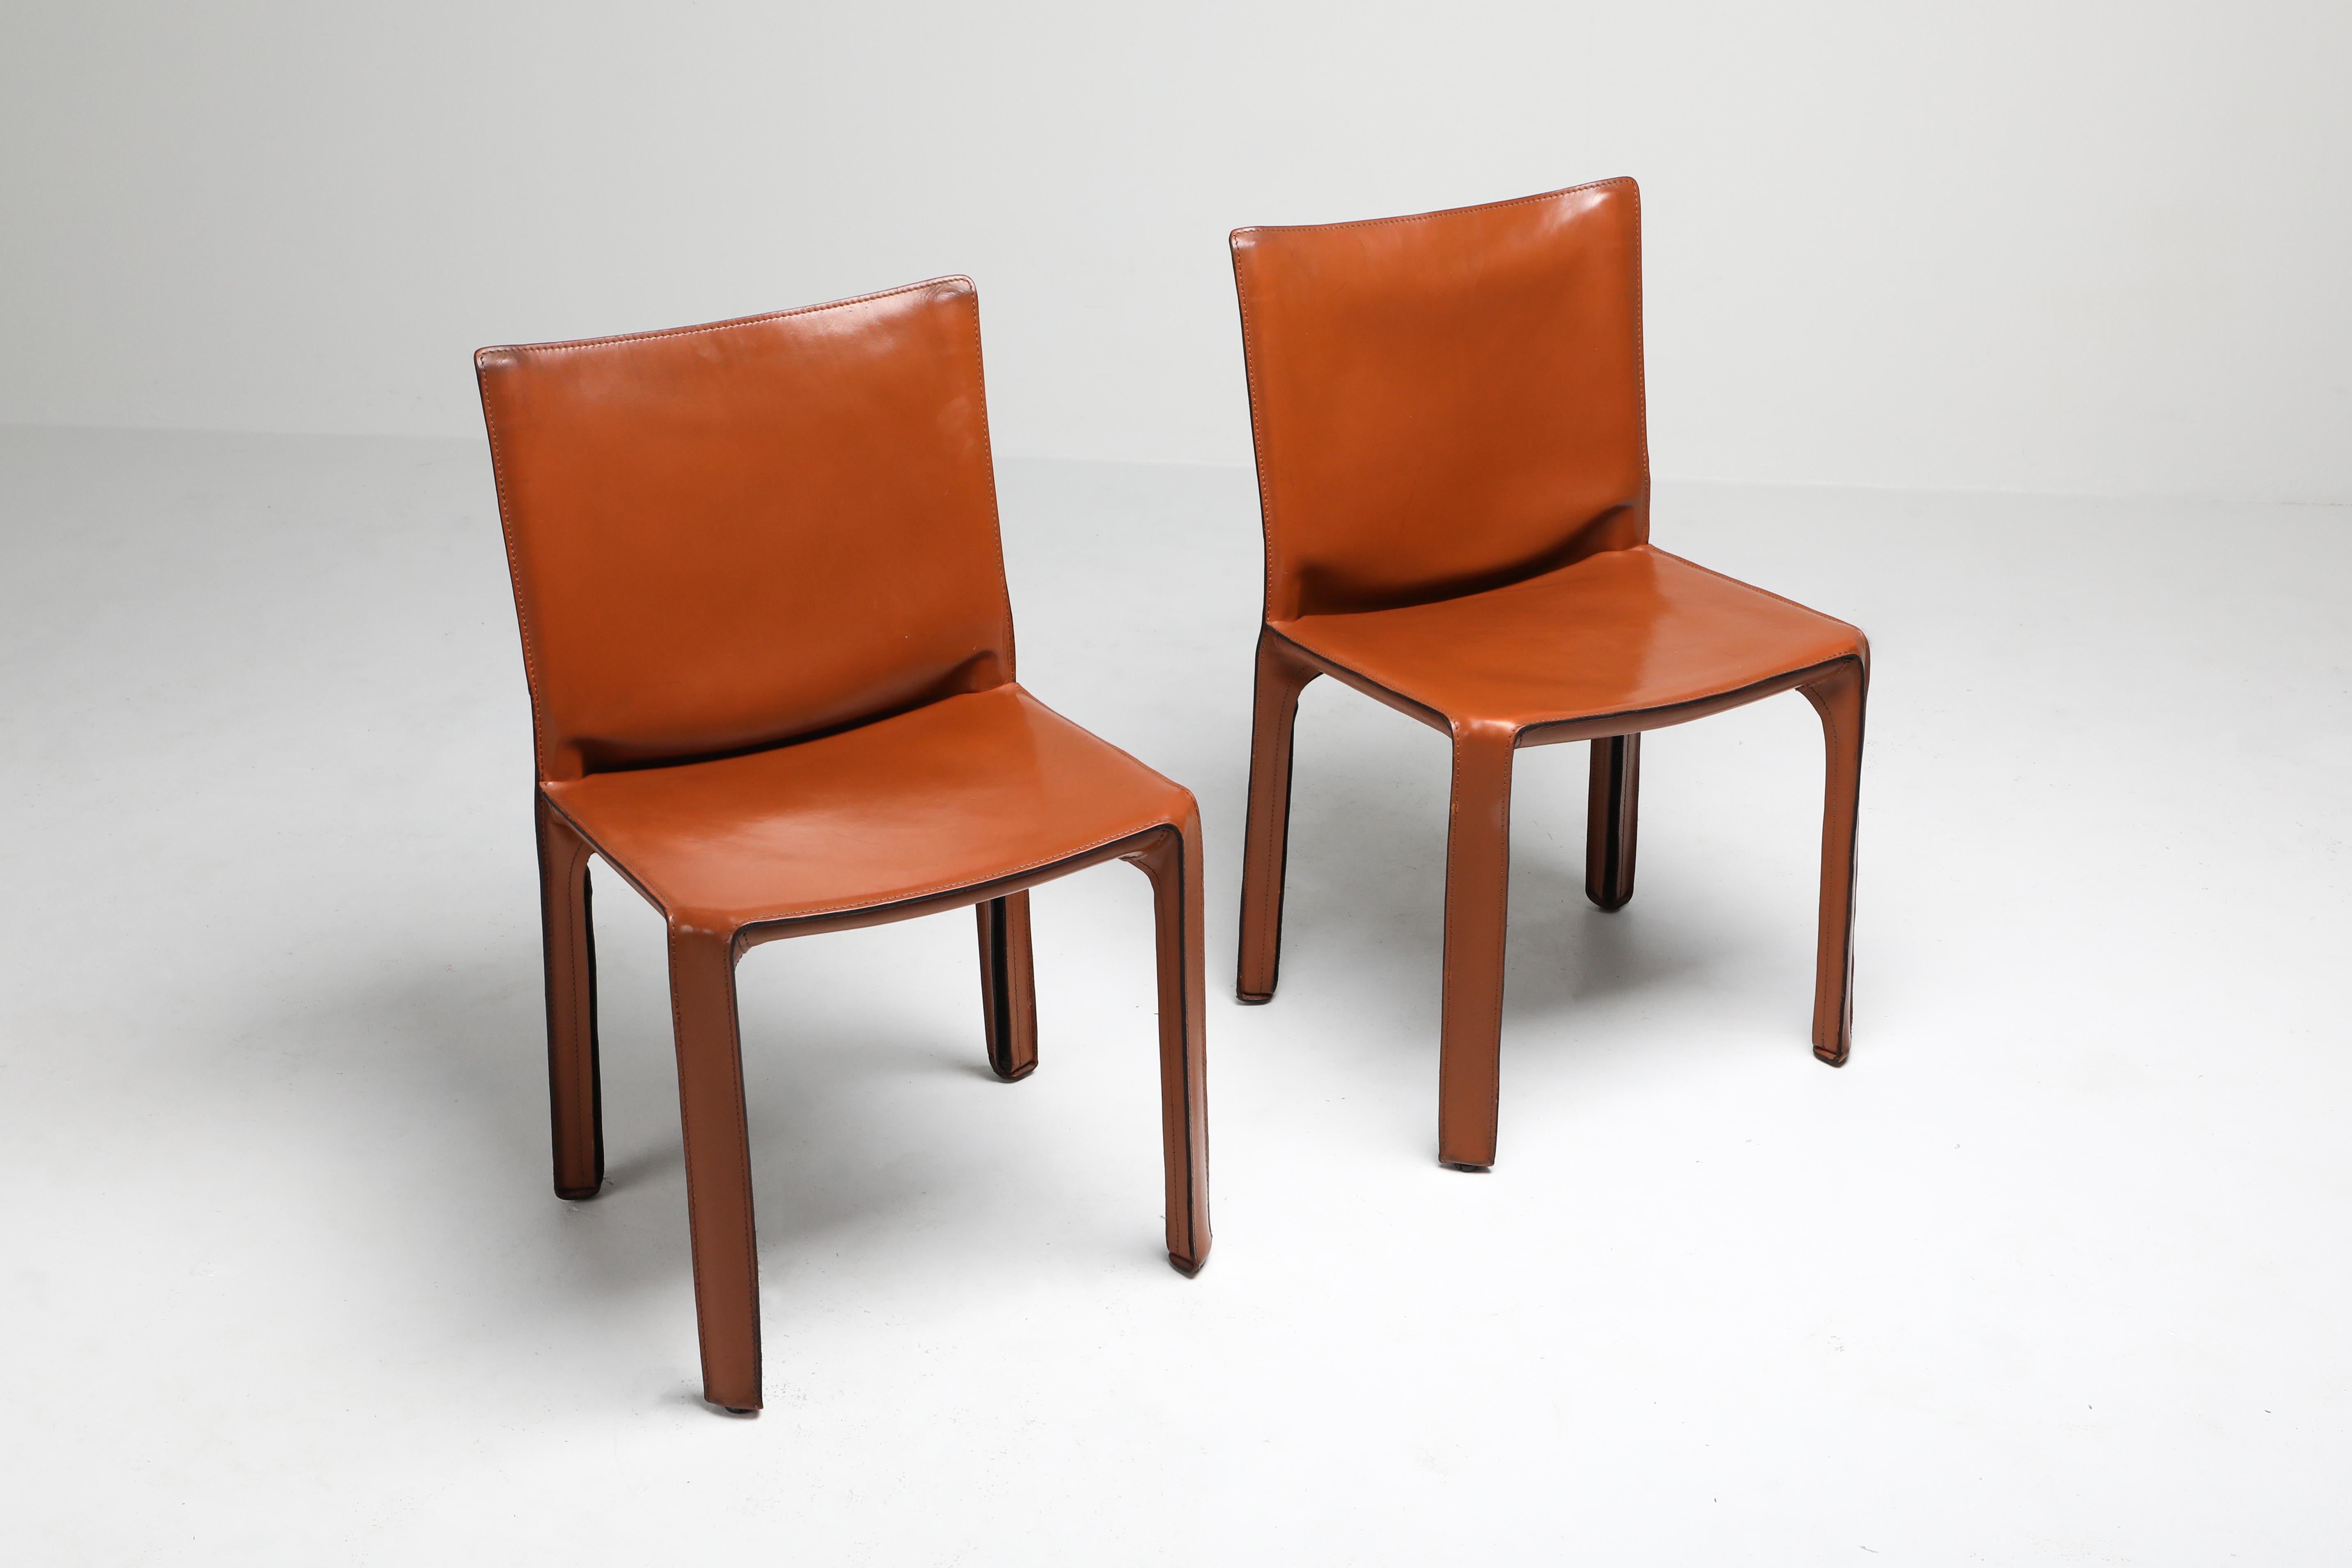 Cognac leather CAB chair by Mario Bellini for Cassina, Italy, 1970s

Rare to find these in this color and condition.

                        